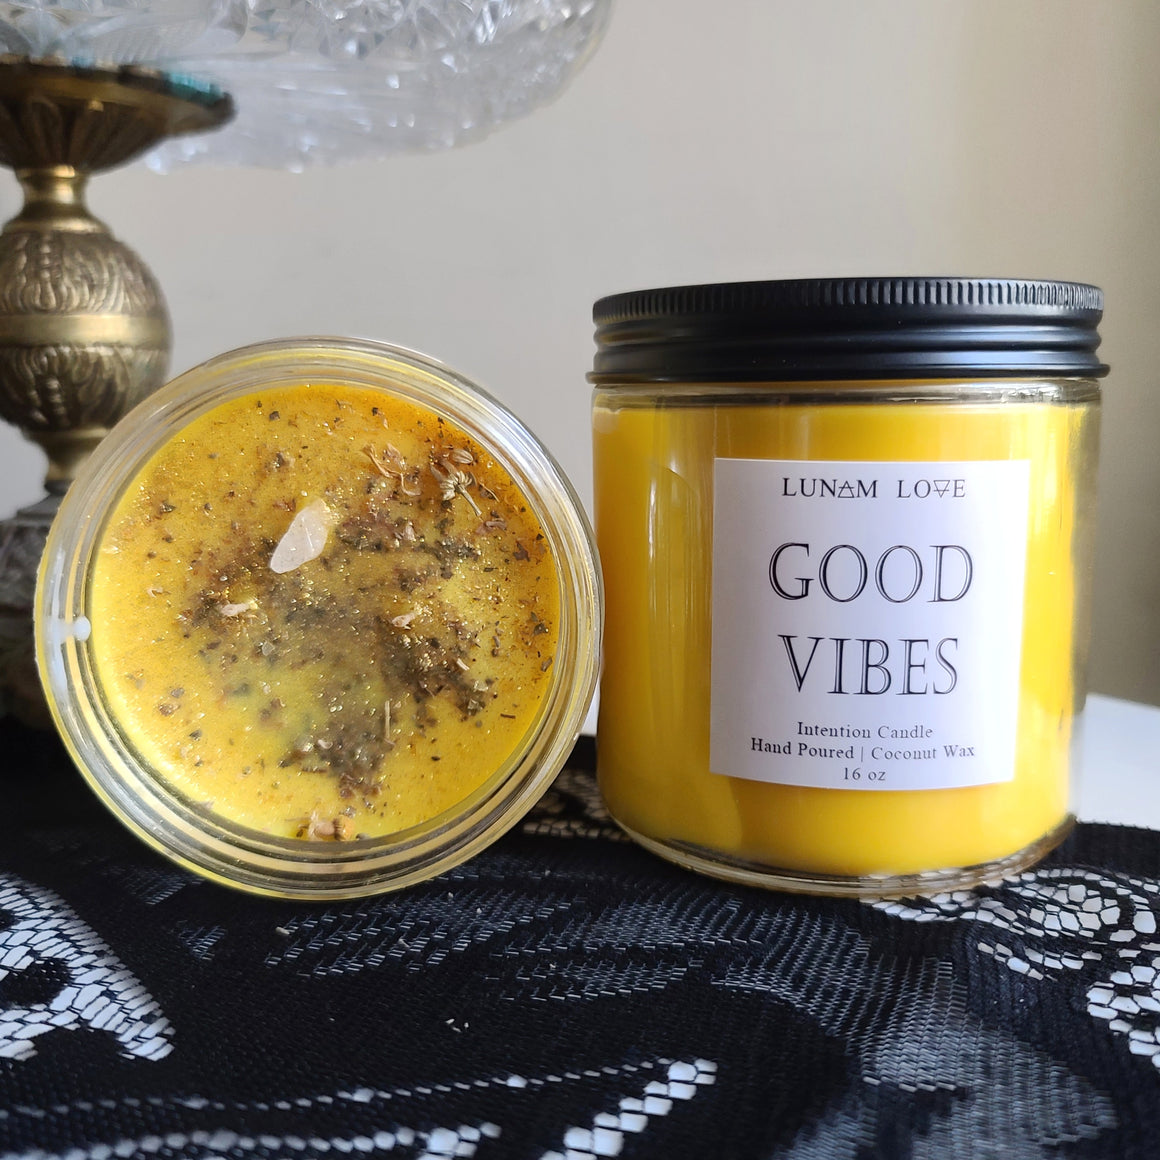 Good Vibes Candle, Glass